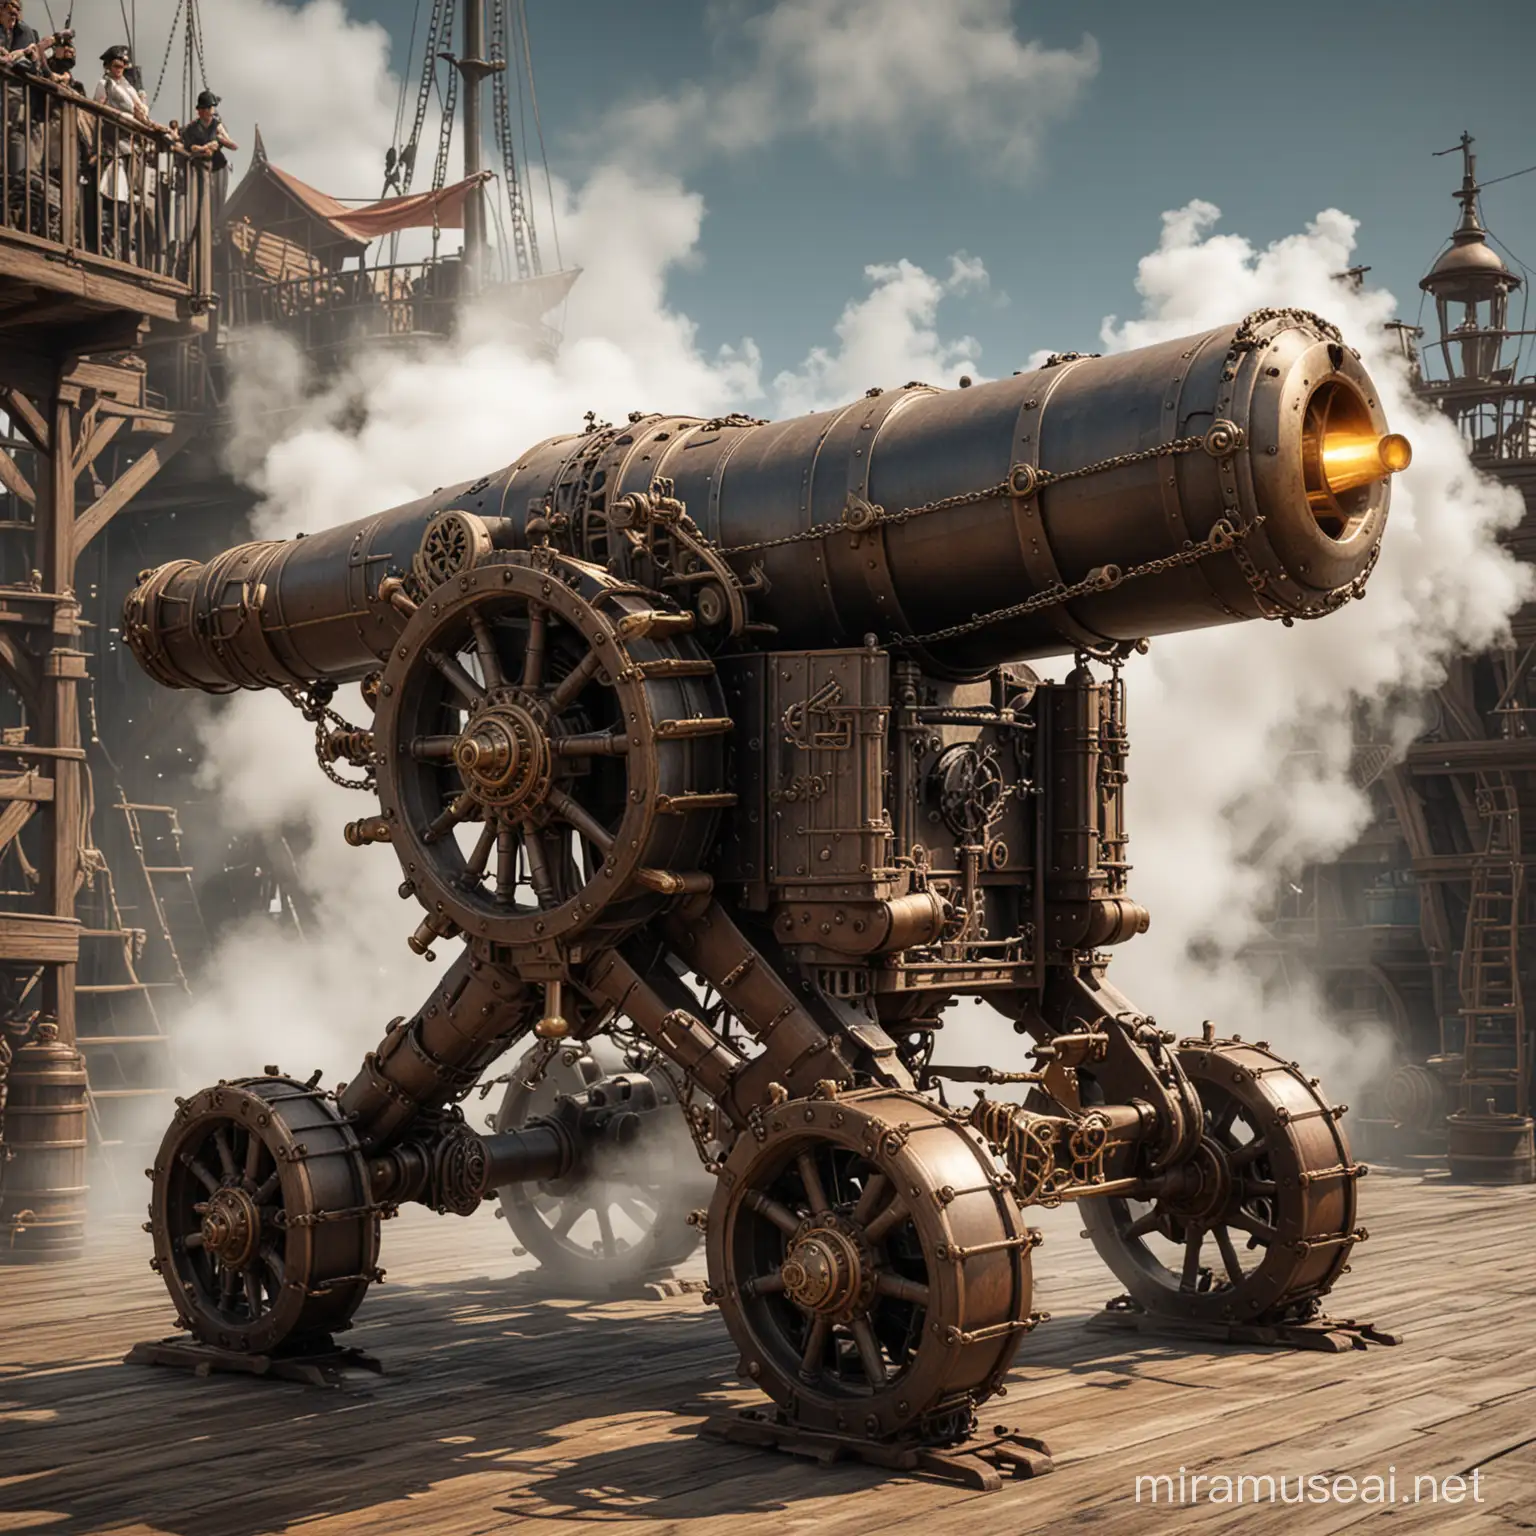 Pirate ship cannon with steam punk mechanical legs